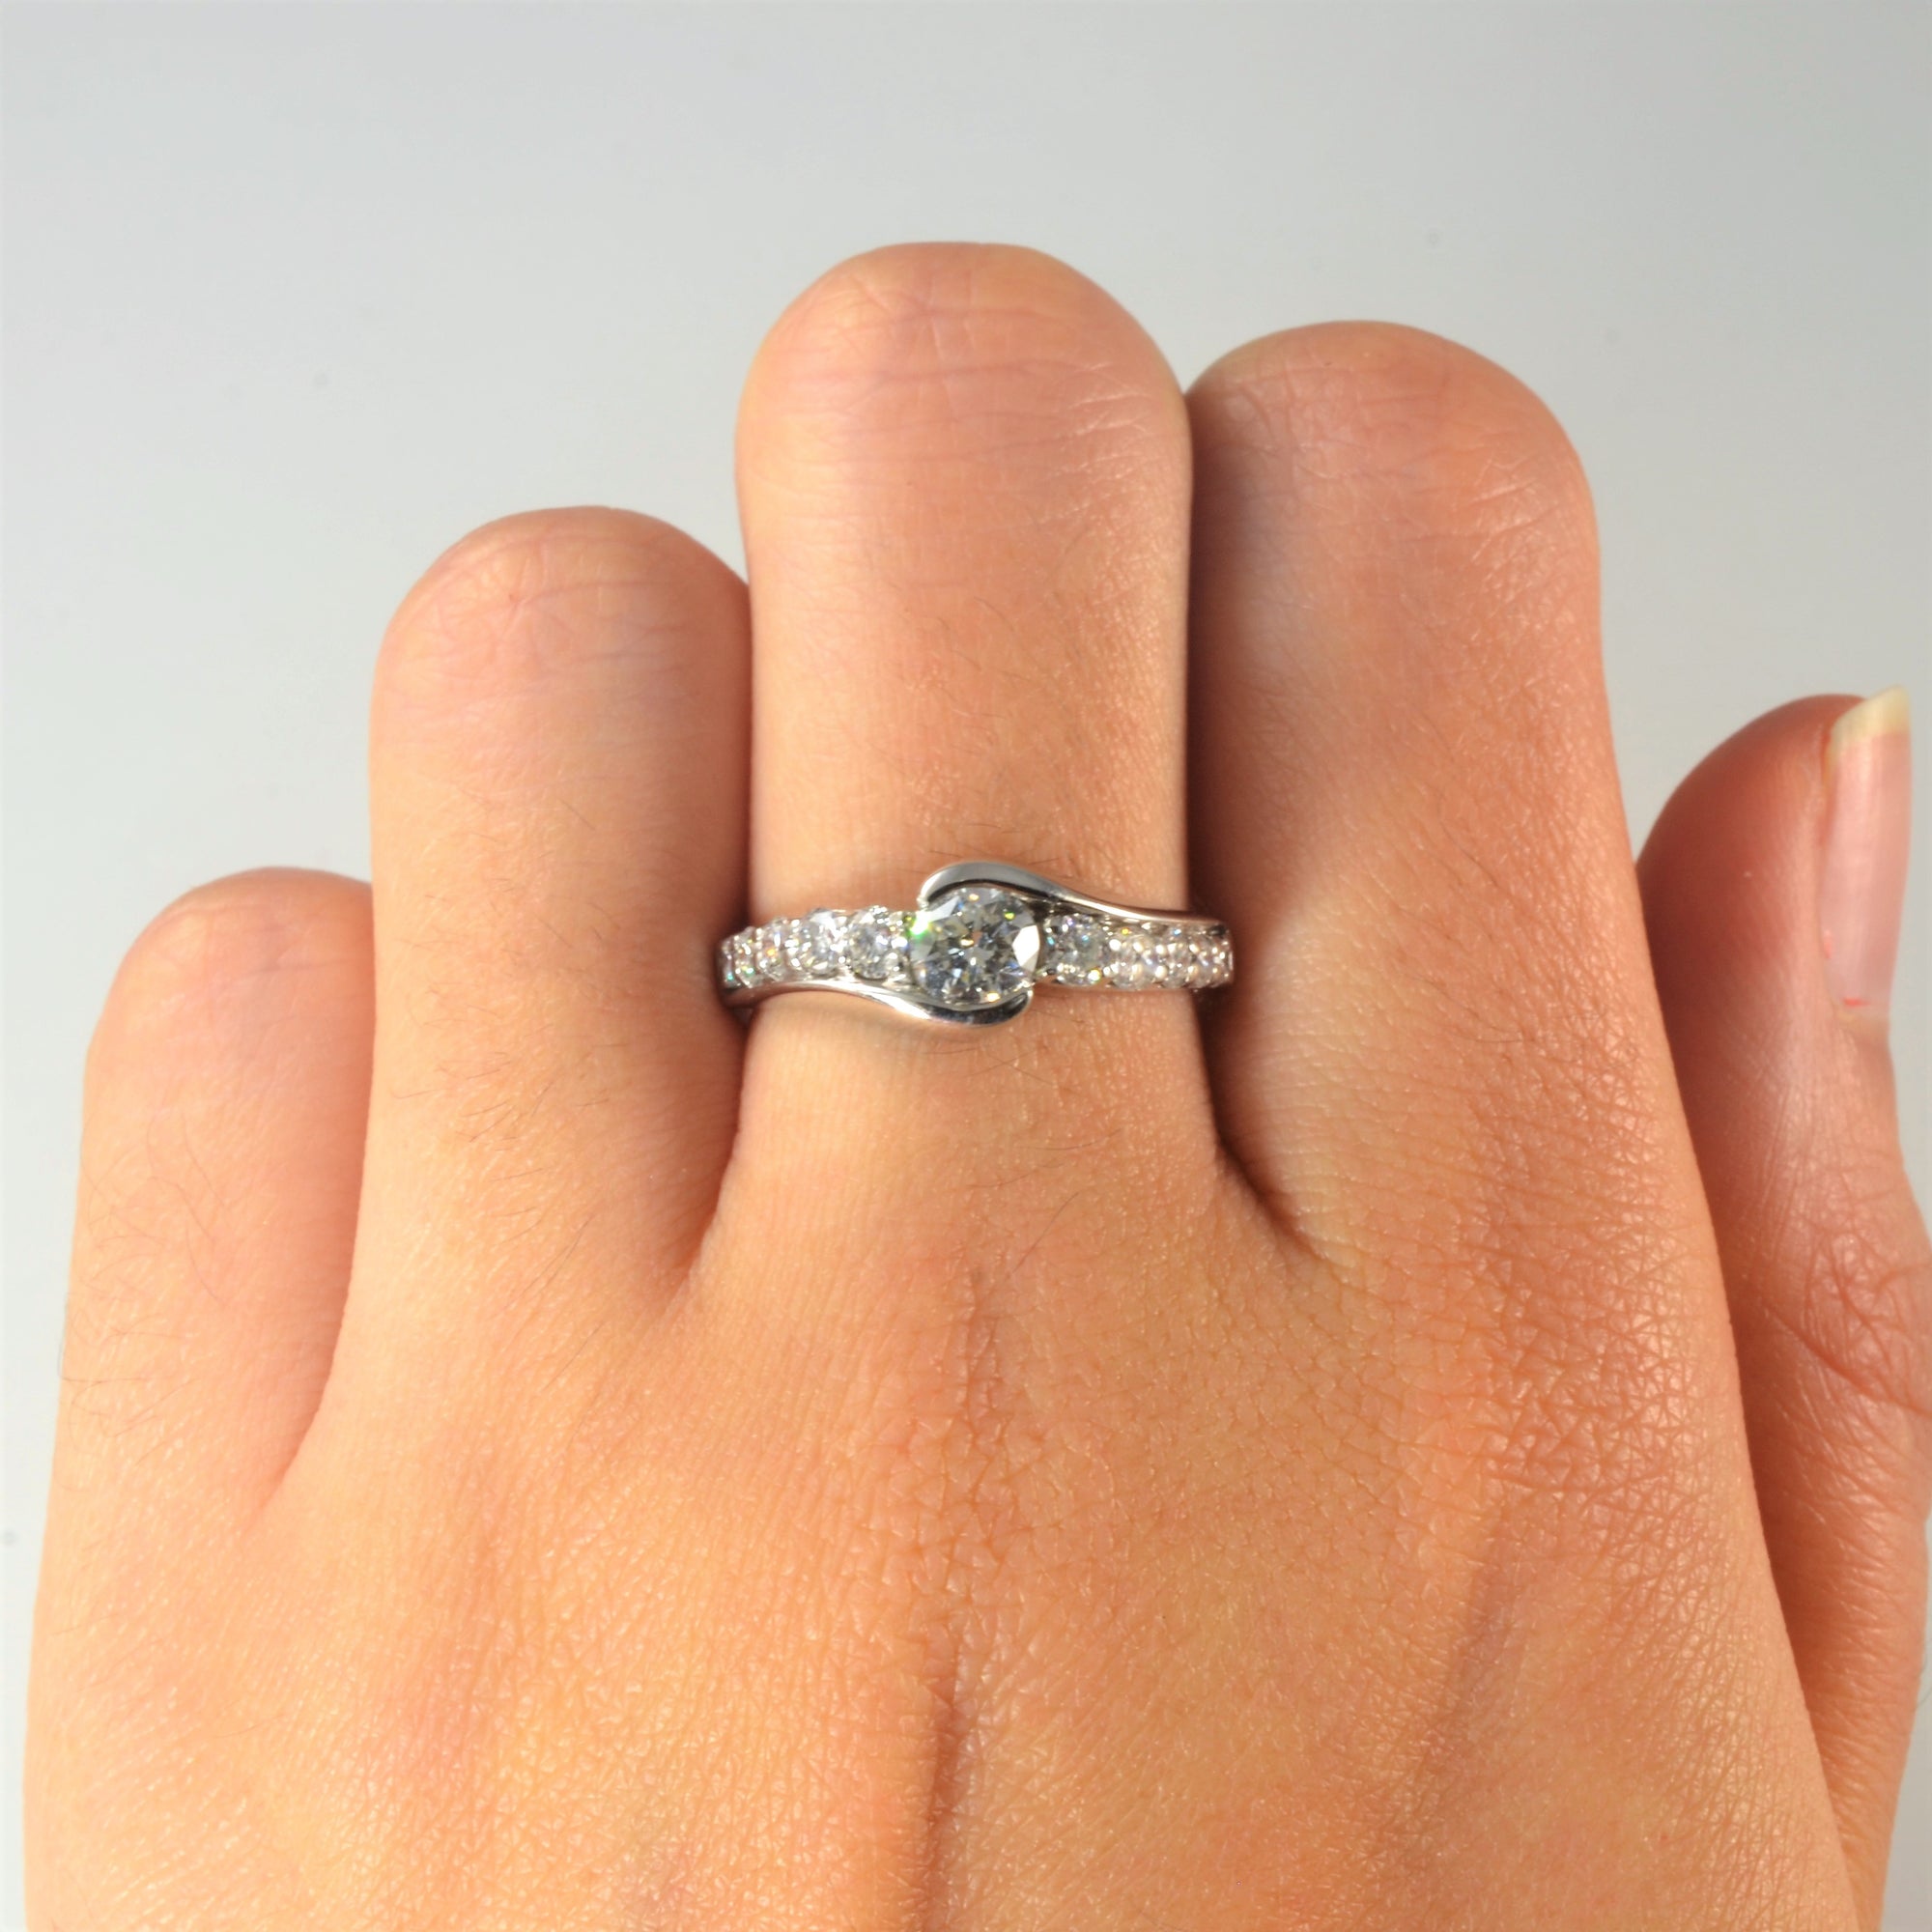 Pave Bypass Diamond Engagement Ring | 0.91ctw | SZ 7.5 |